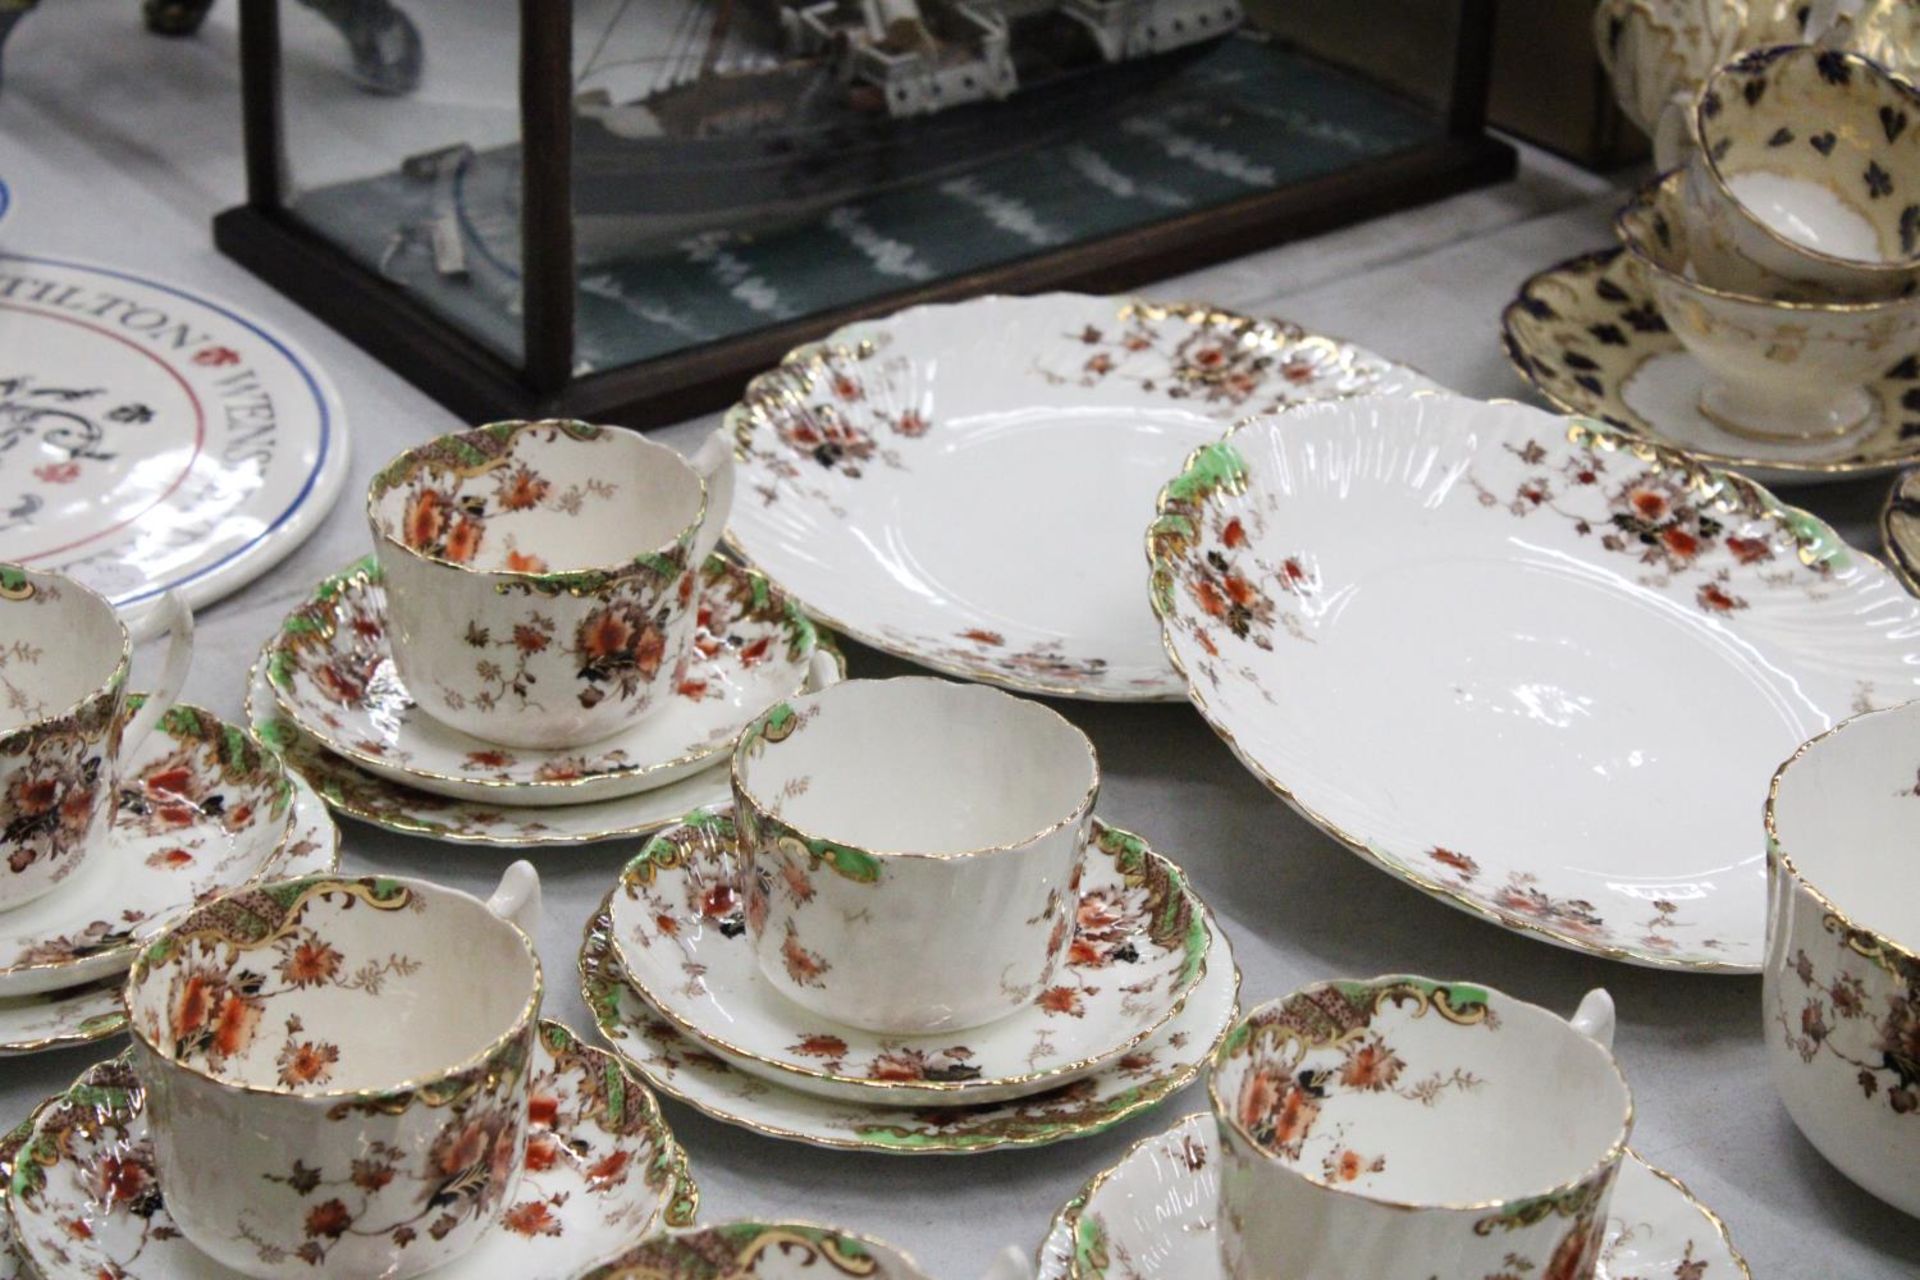 A ROYAL ALBERT CROWN CHINA "POPPY" PART TEASET TO INCLUDE CUPS, SAUCERS, SIDE PLATES AND SUGAR - Image 3 of 5